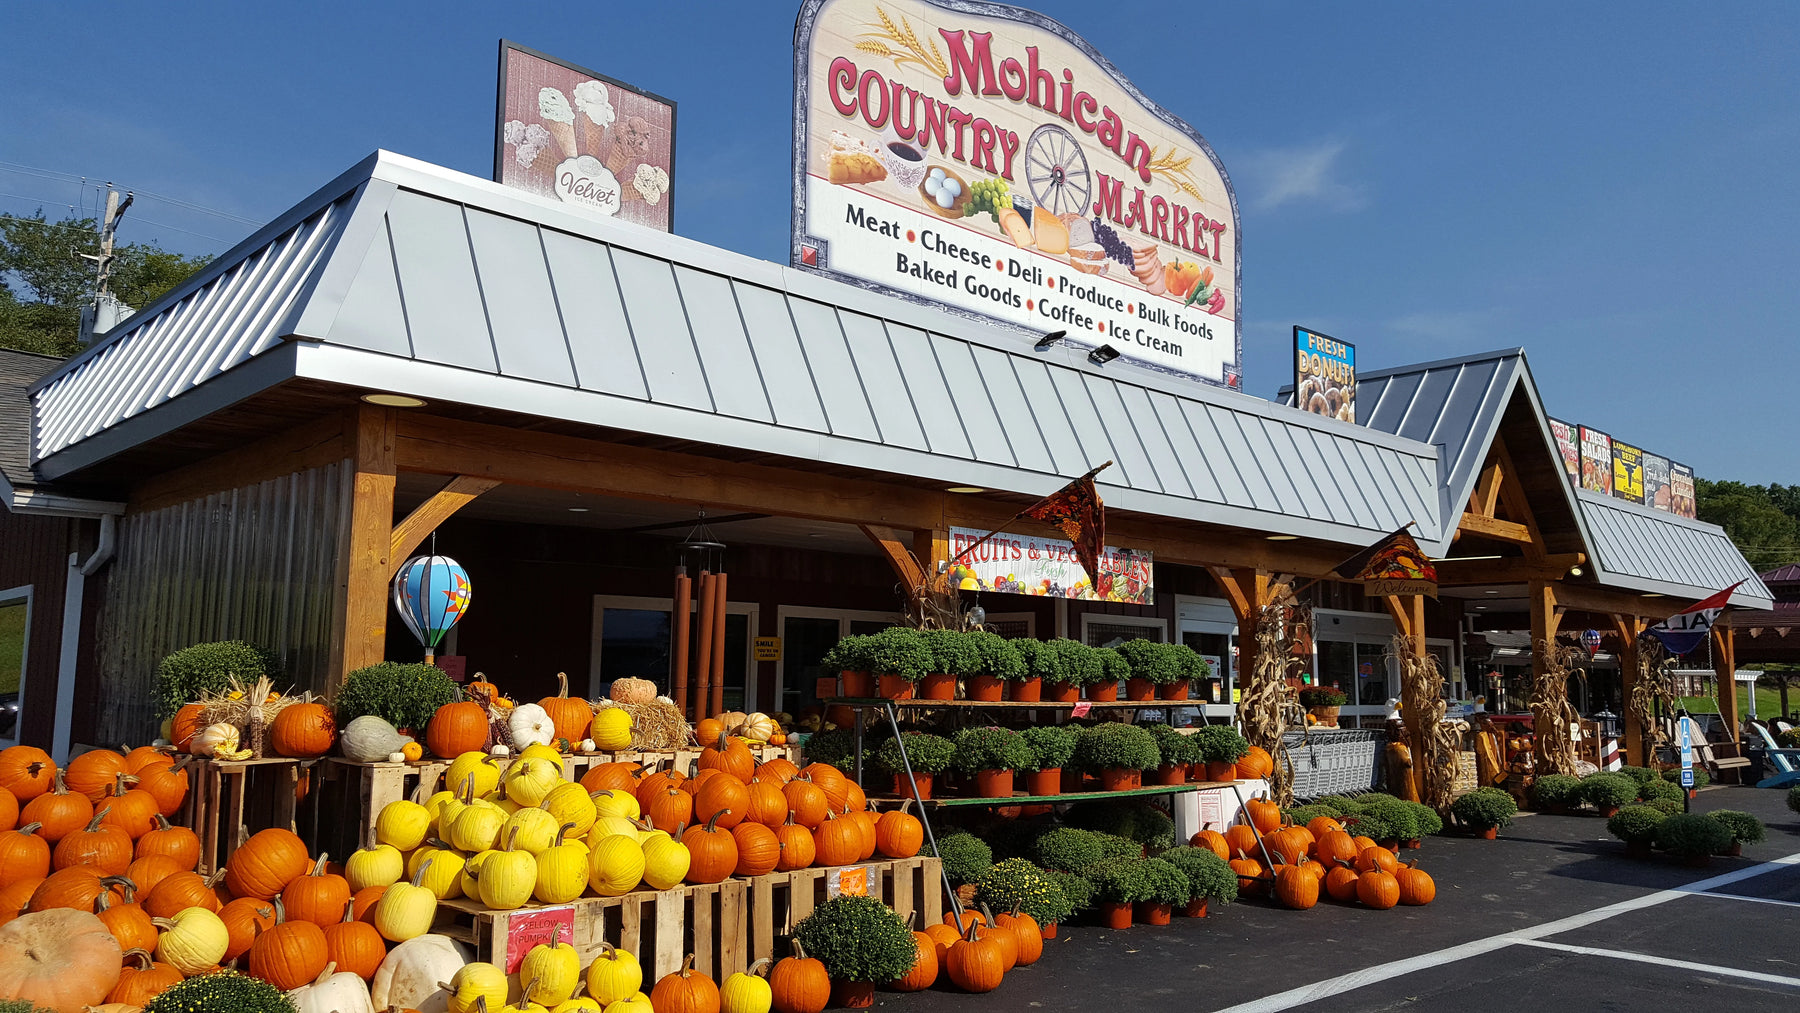 Discovering Local Delights: Top 5 Must-Try Foods at Mohican Country Market